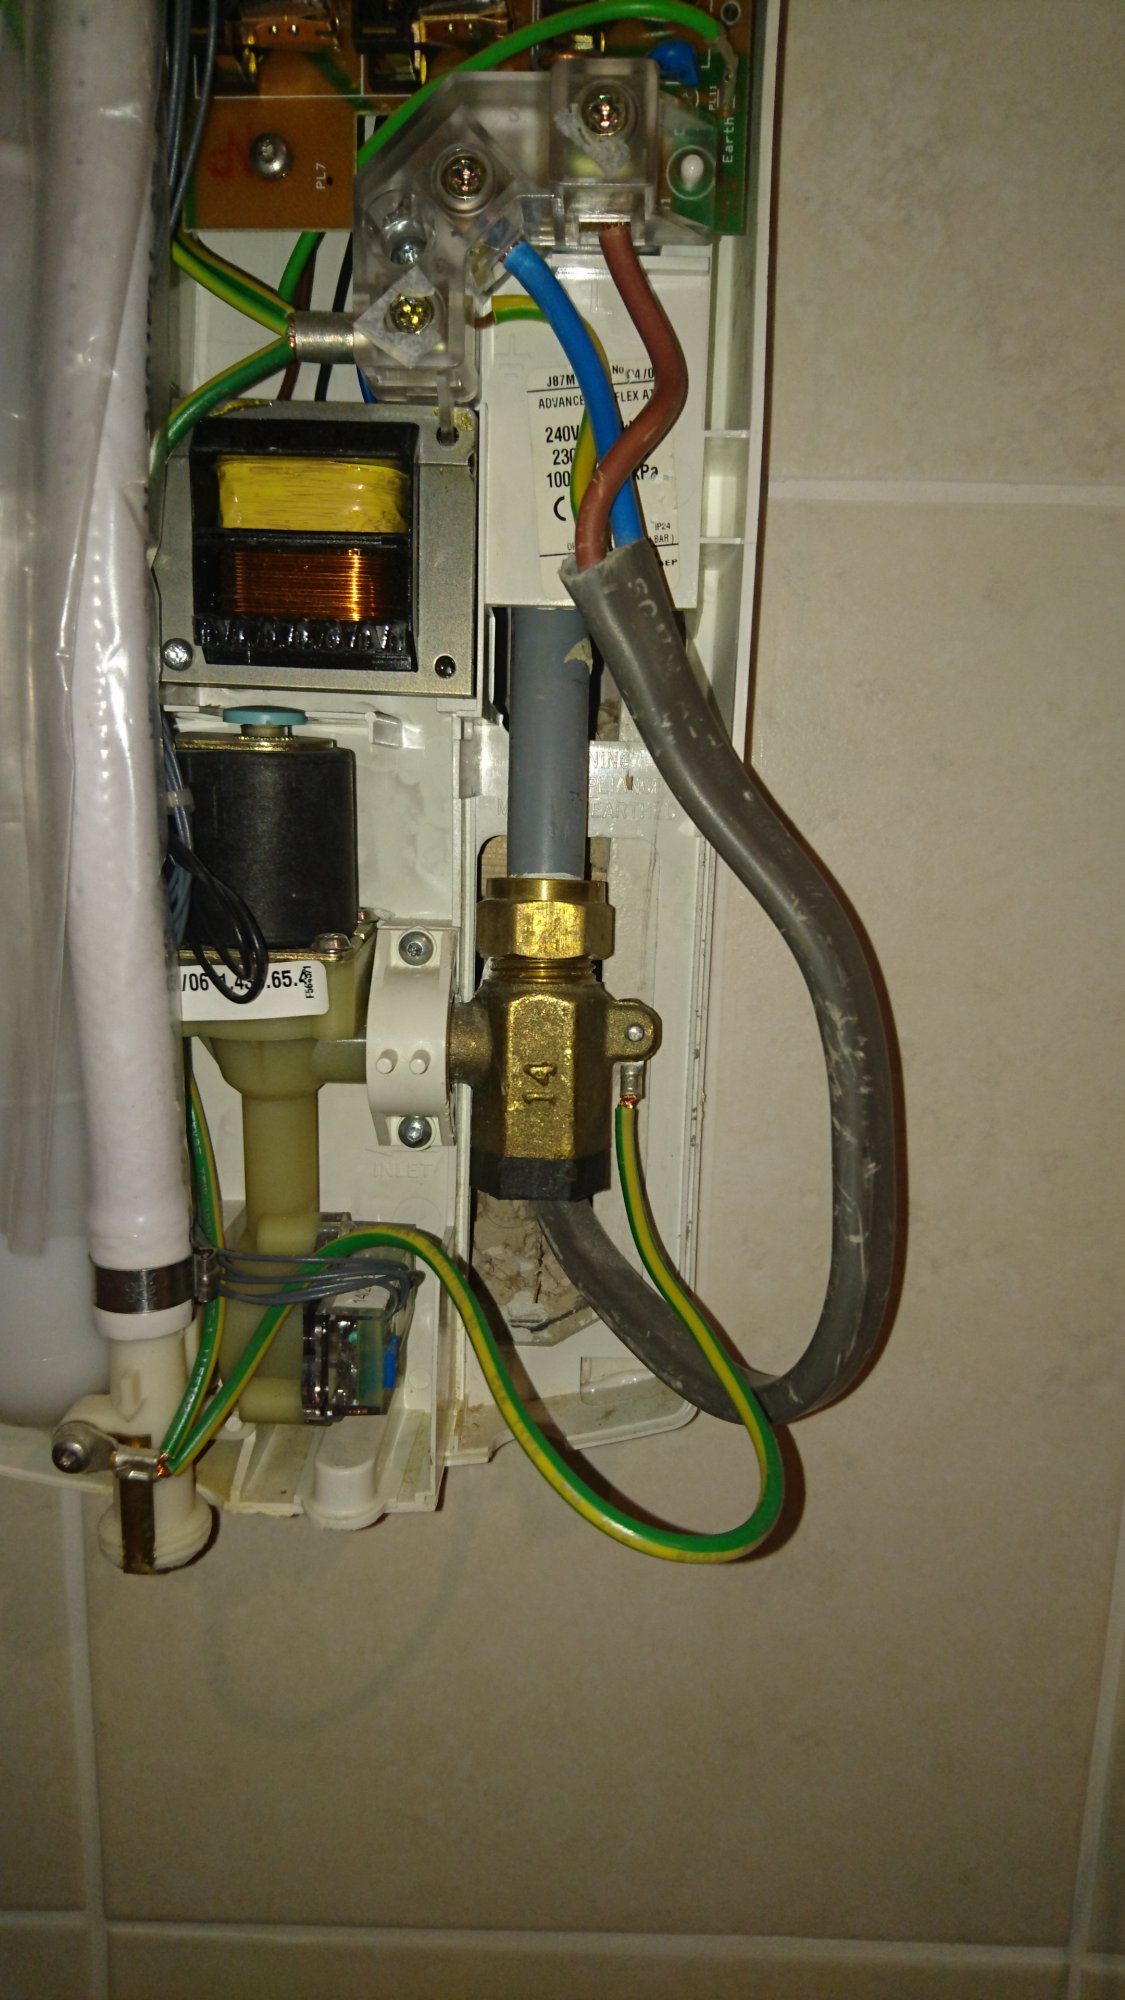 Electric shower inlet fitting | DIYnot Forums wiring diagram for electric water heater 